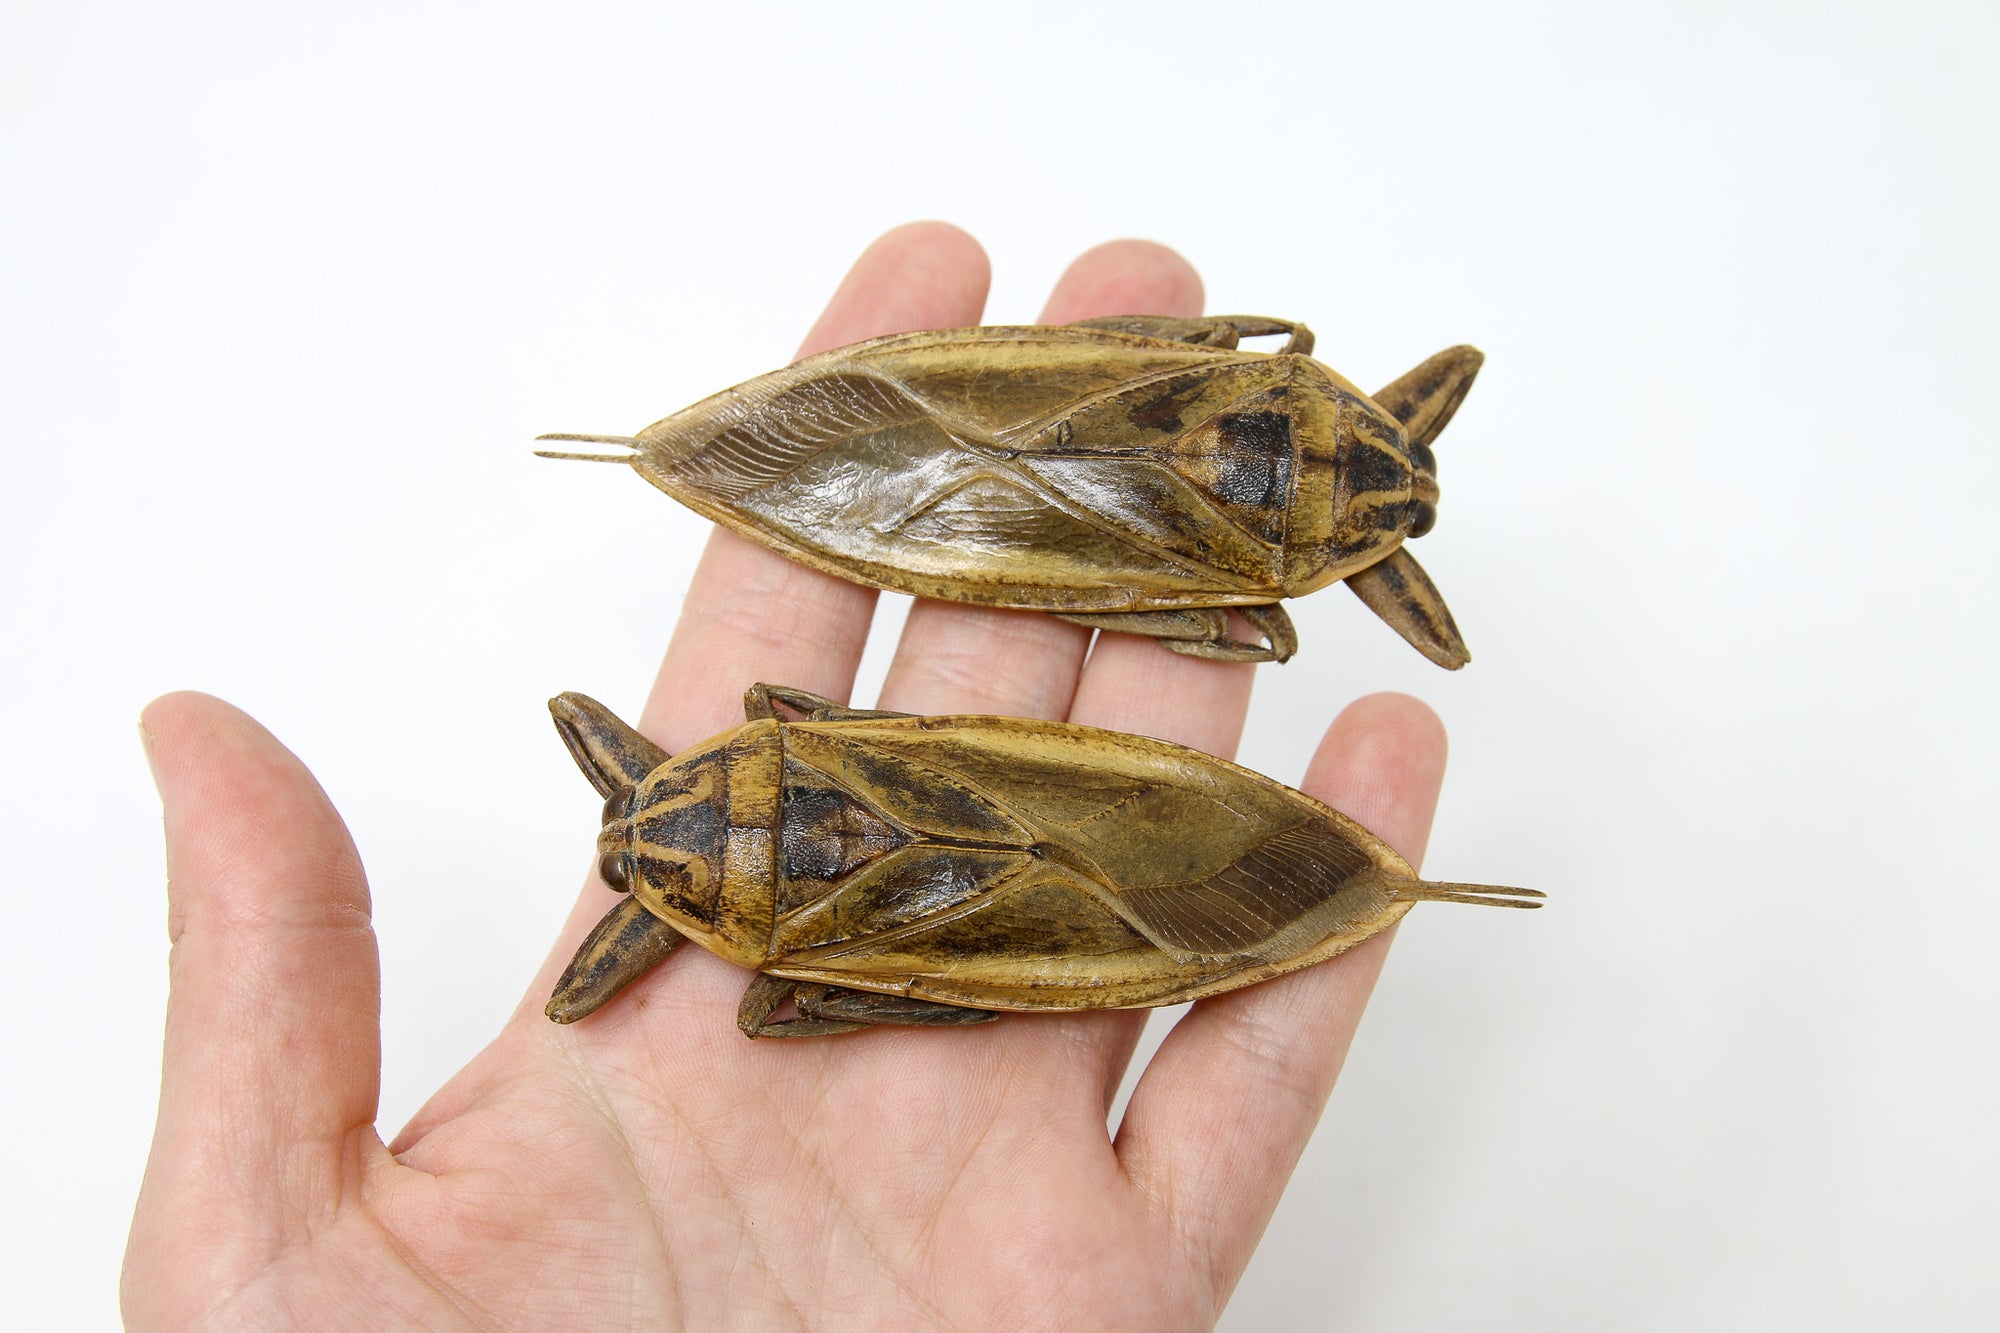 2 x Thai Giant Water Bugs (Lethocerus grandis) Belostomatidae Specimens A1 Quality Real Insect Entomology